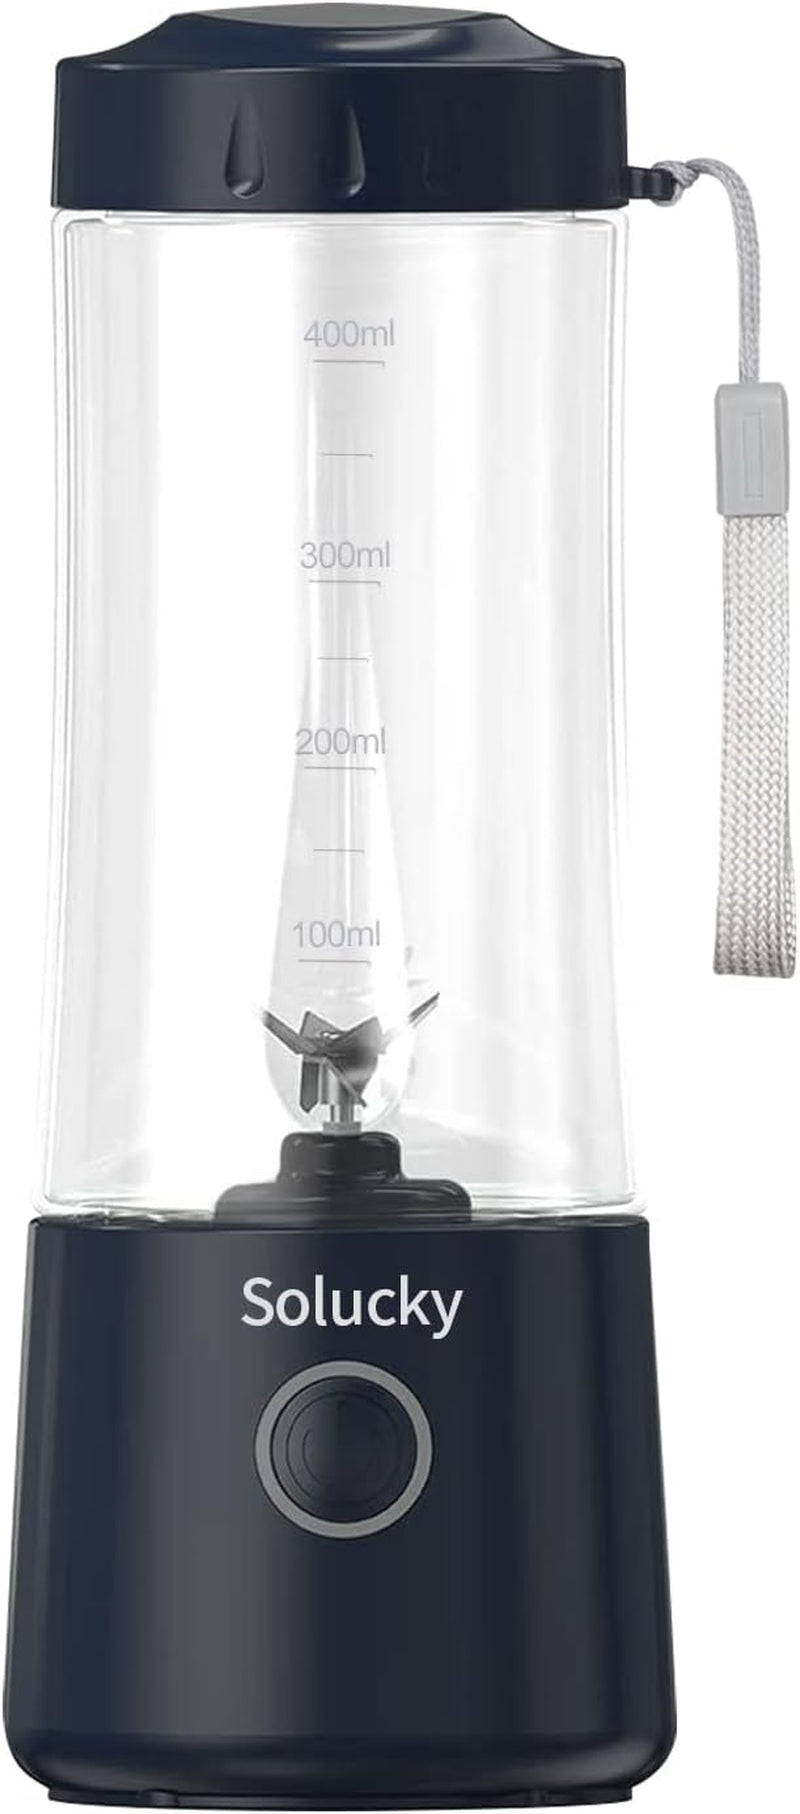 14 Oz Portable Blender, Cordless & Rechargeable, Ideal for Travel and Home Use  Solucky   